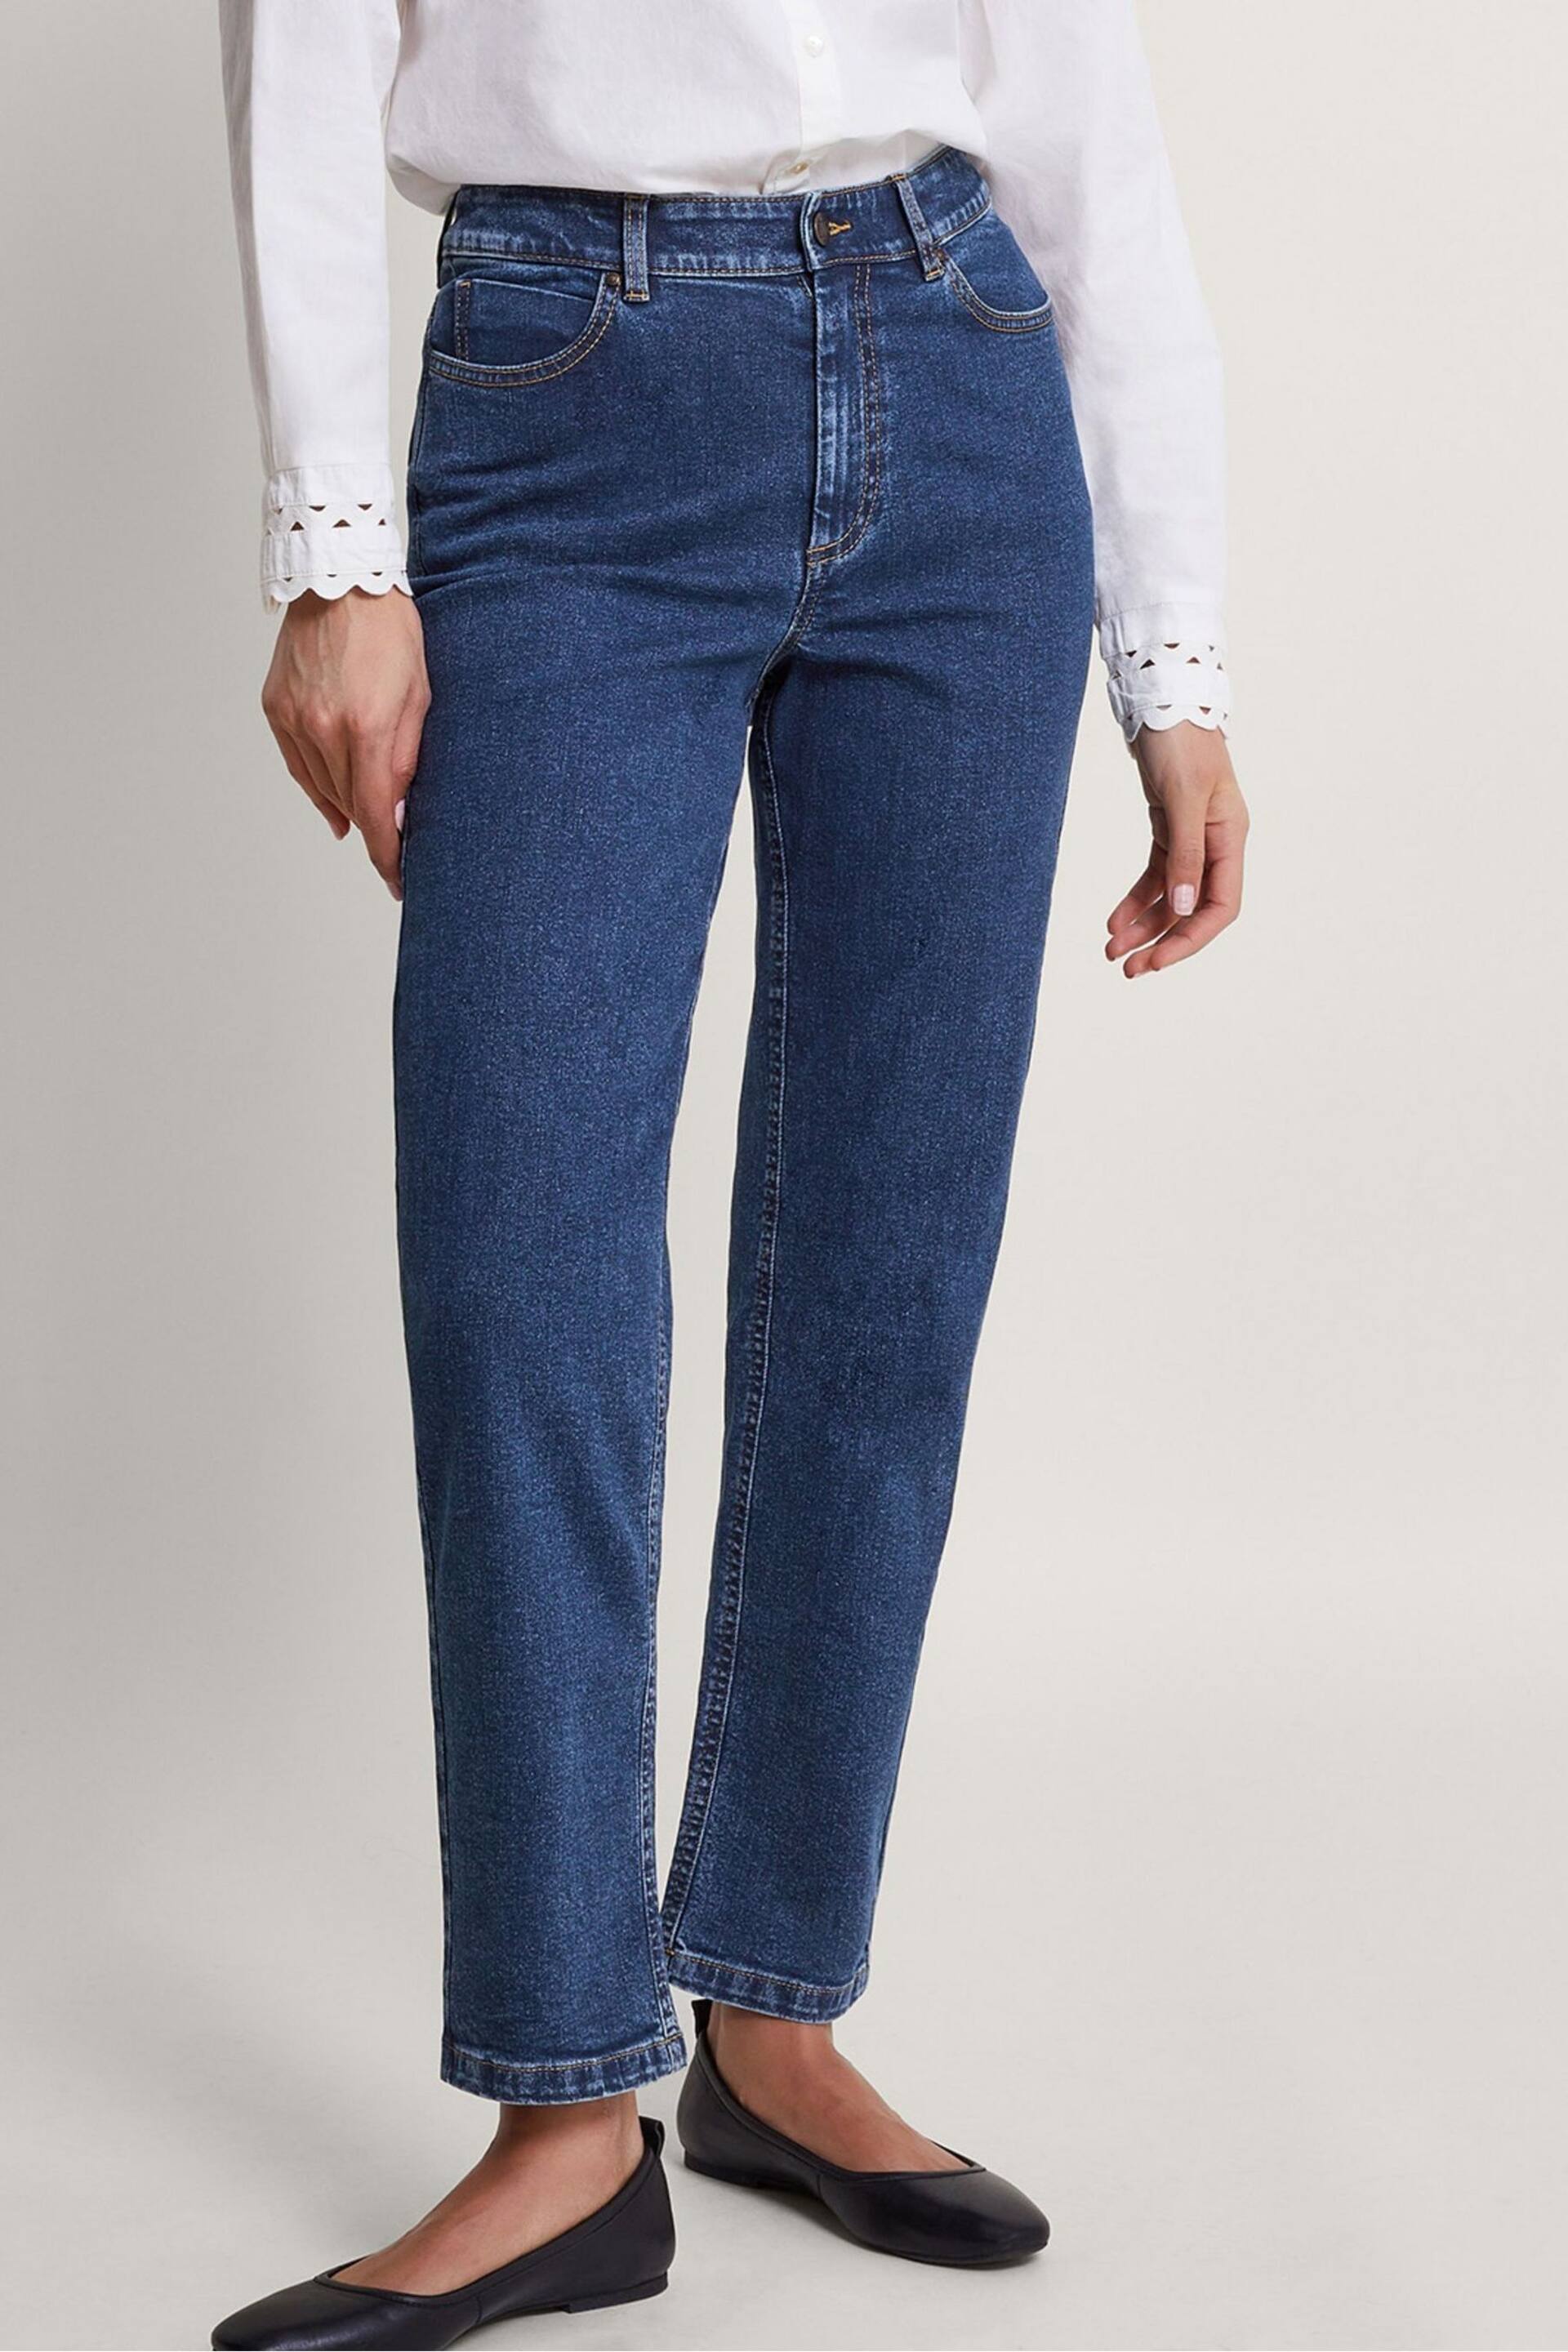 Monsoon Blue Alice Straight Jeans - Image 2 of 5